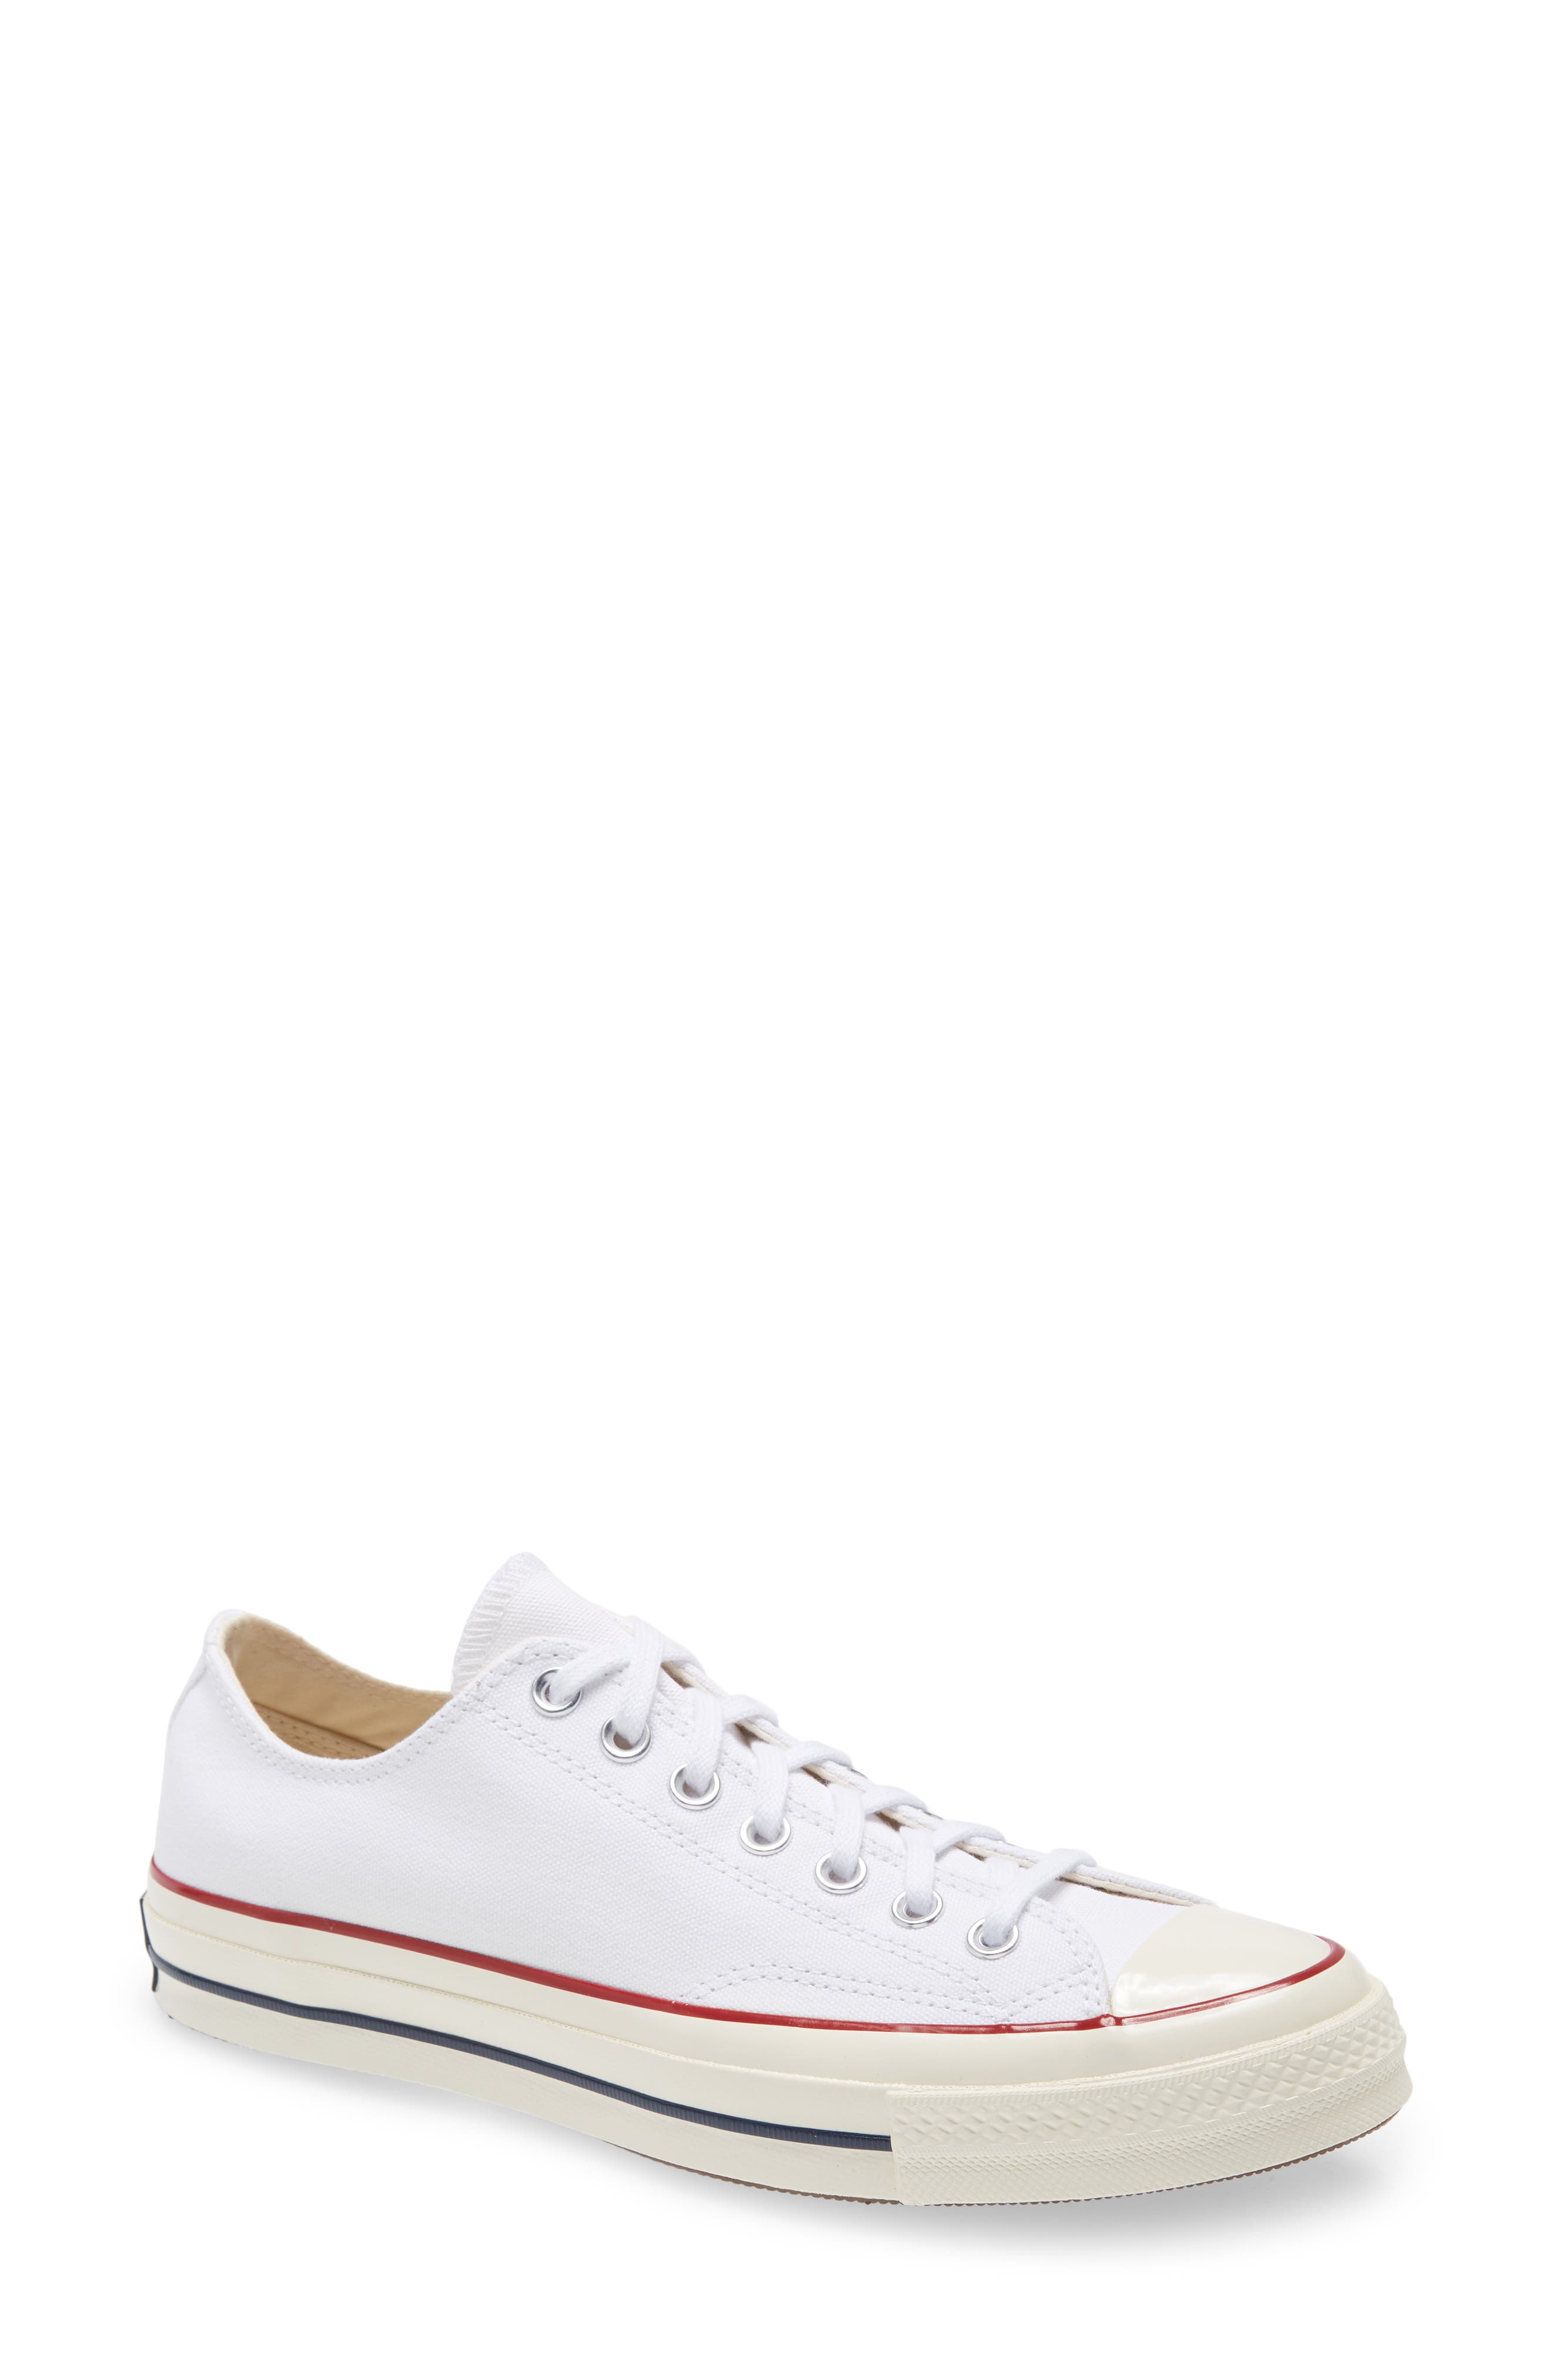 Converse Chuck Taylor(R) All Star(R) 70 Low Top Sneaker in Dark Moss/Egret/Black at Nordstrom